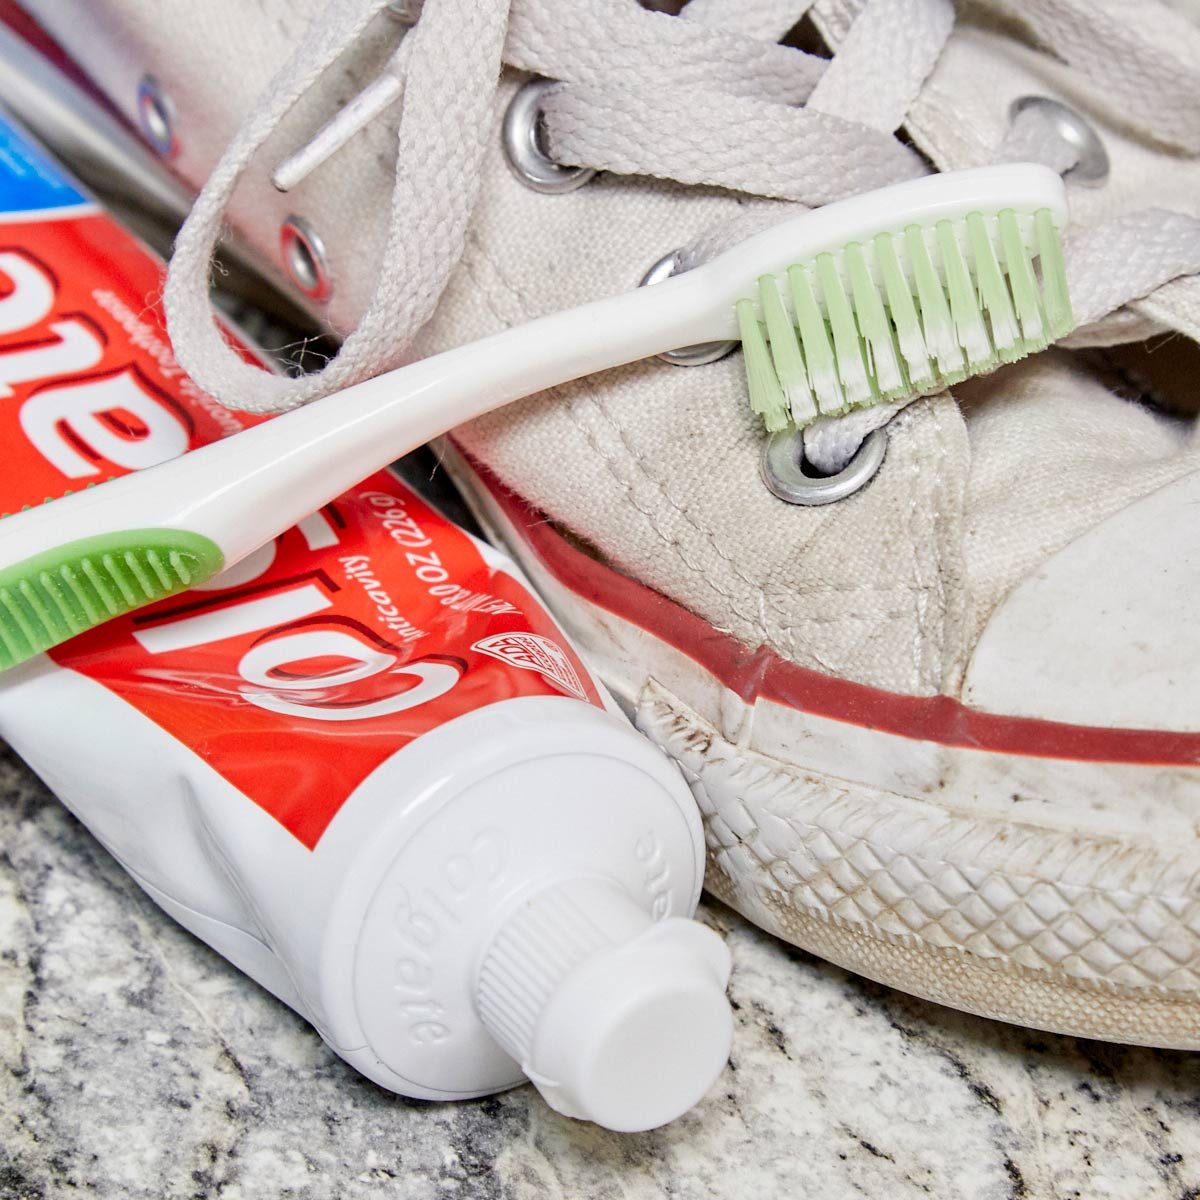 cleaning white converse with toothpaste